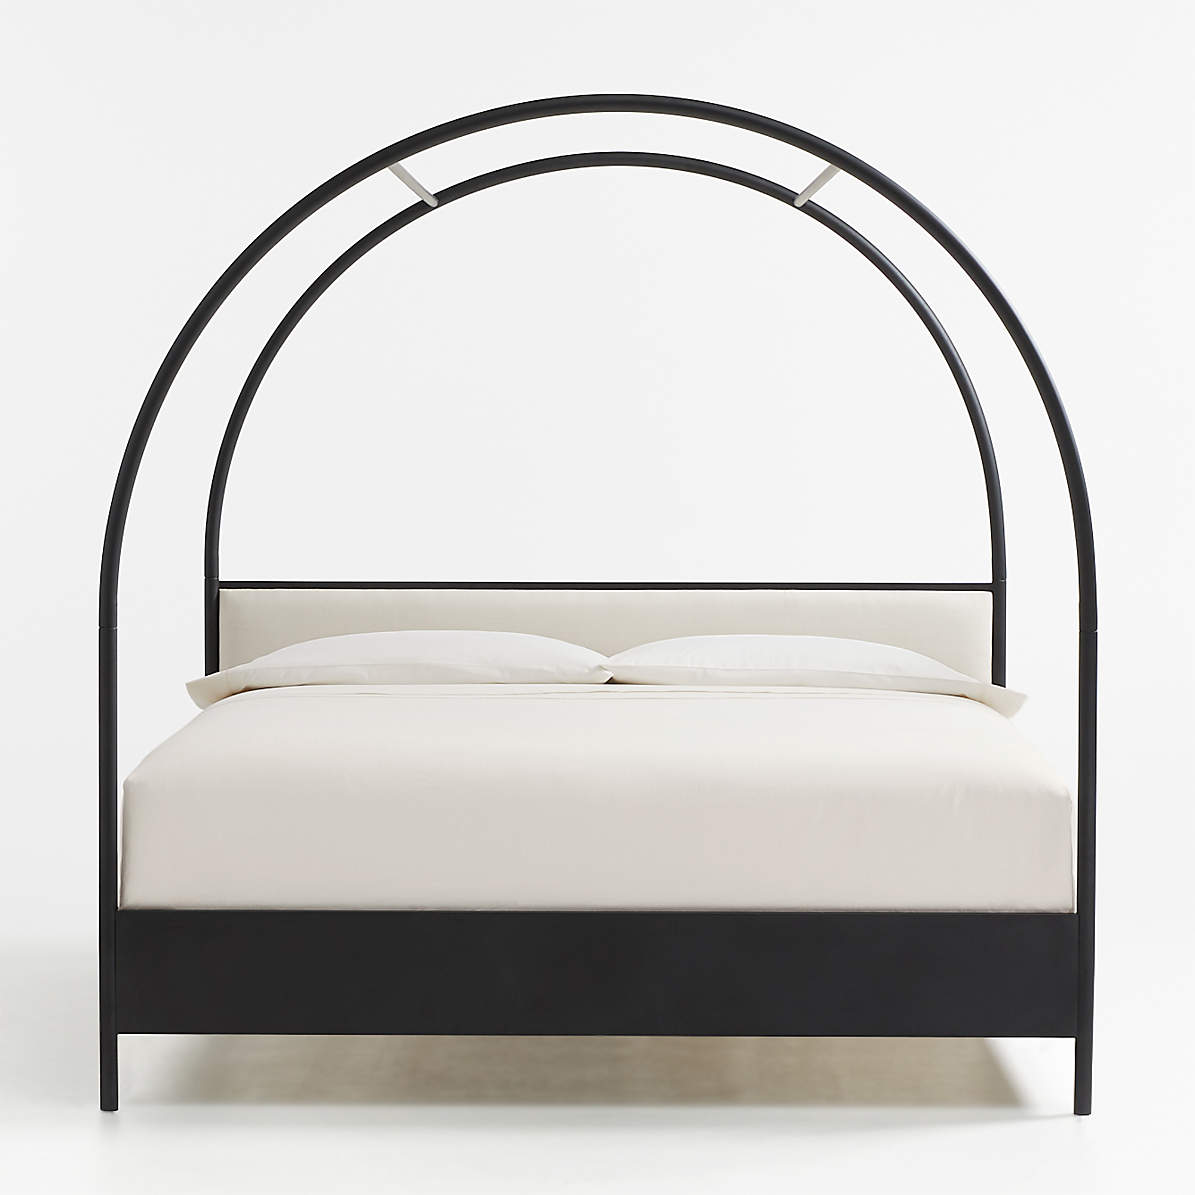 Canyon King Arched Canopy Bed With, California King Canopy Bed Frame